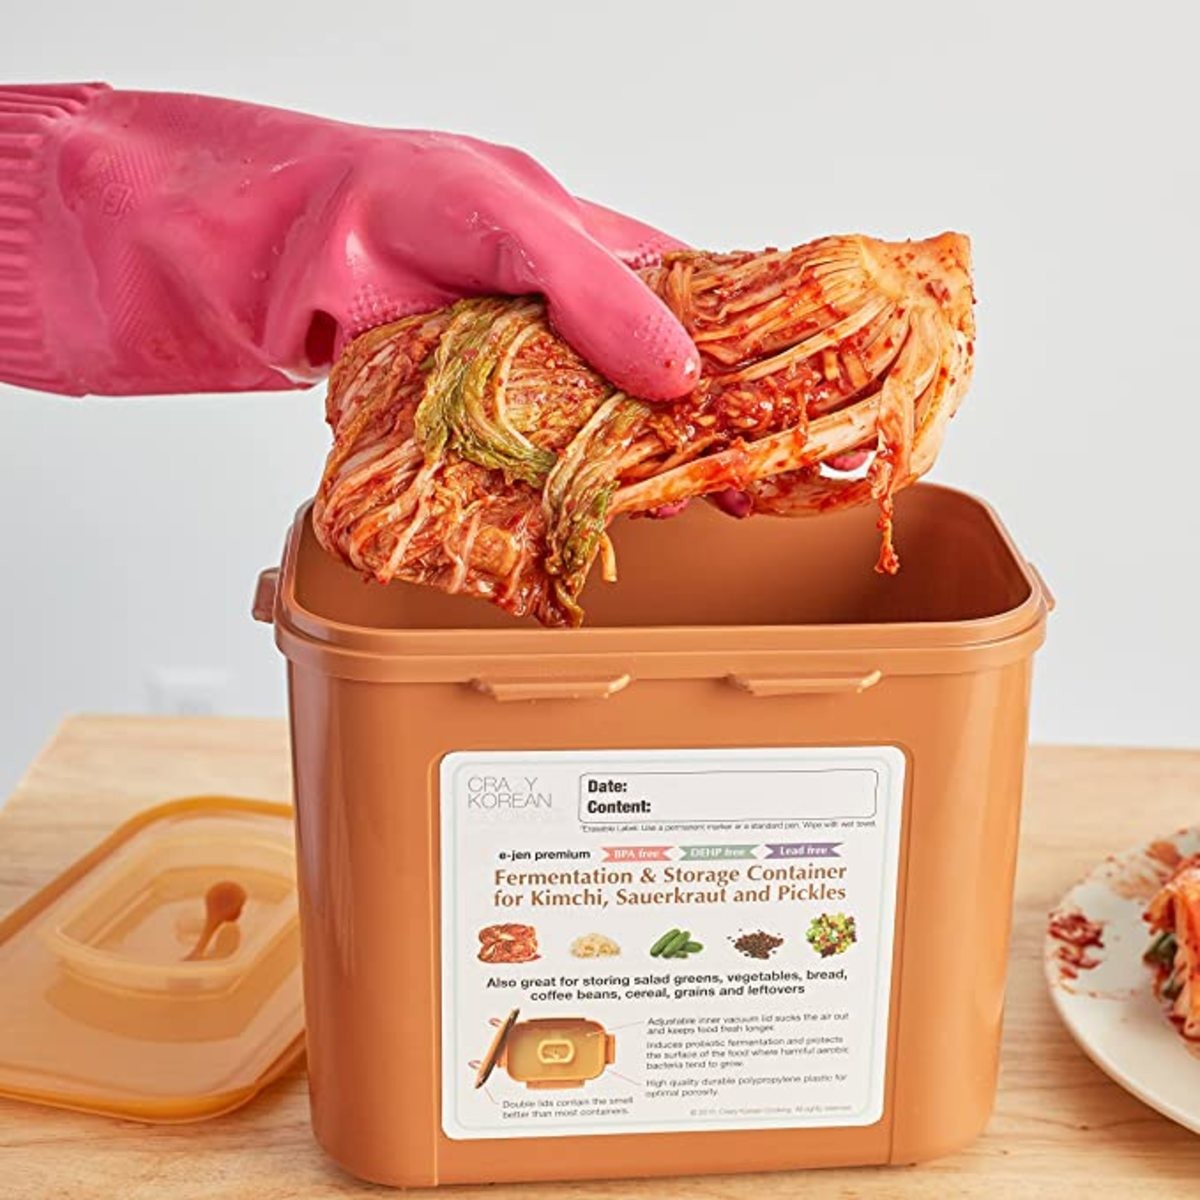 I ING LOVE KIMCHI. i bought one of these boxs ( mines orange and 20Q) cause i was making it outa /in a small ice cooler thing..but the cabbage head i used was t